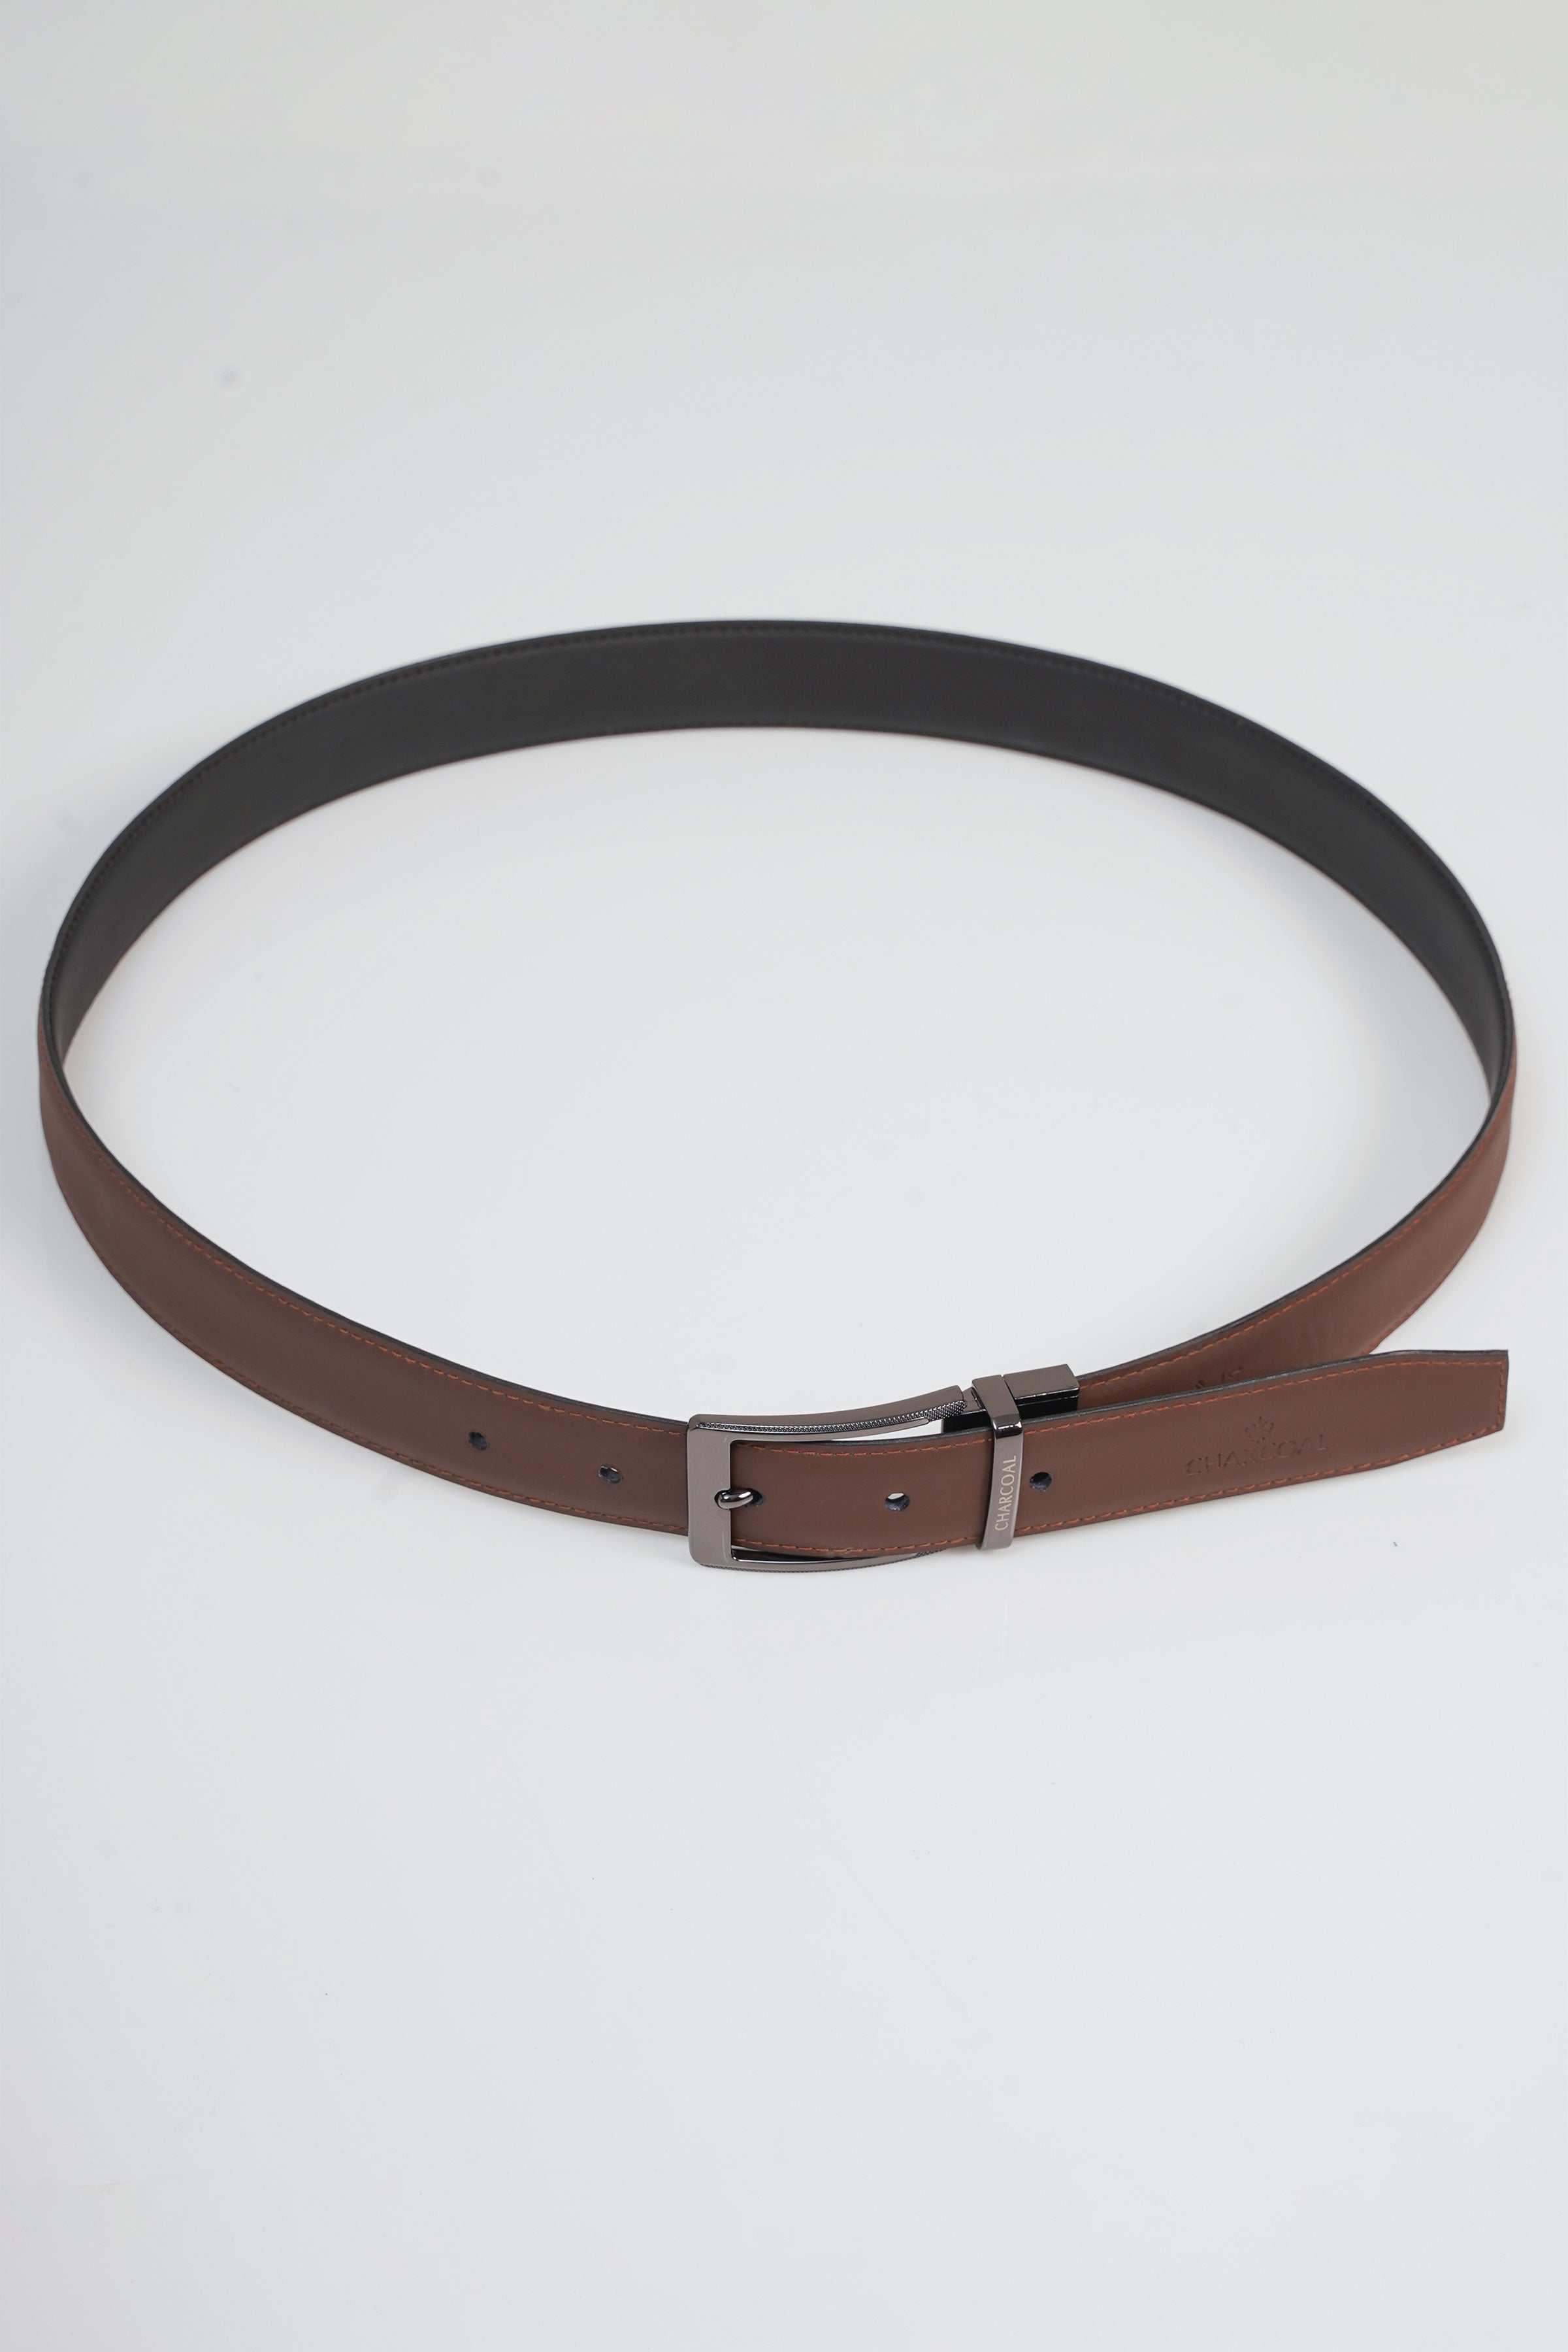 REVERSIBLE BELT at Charcoal Clothing